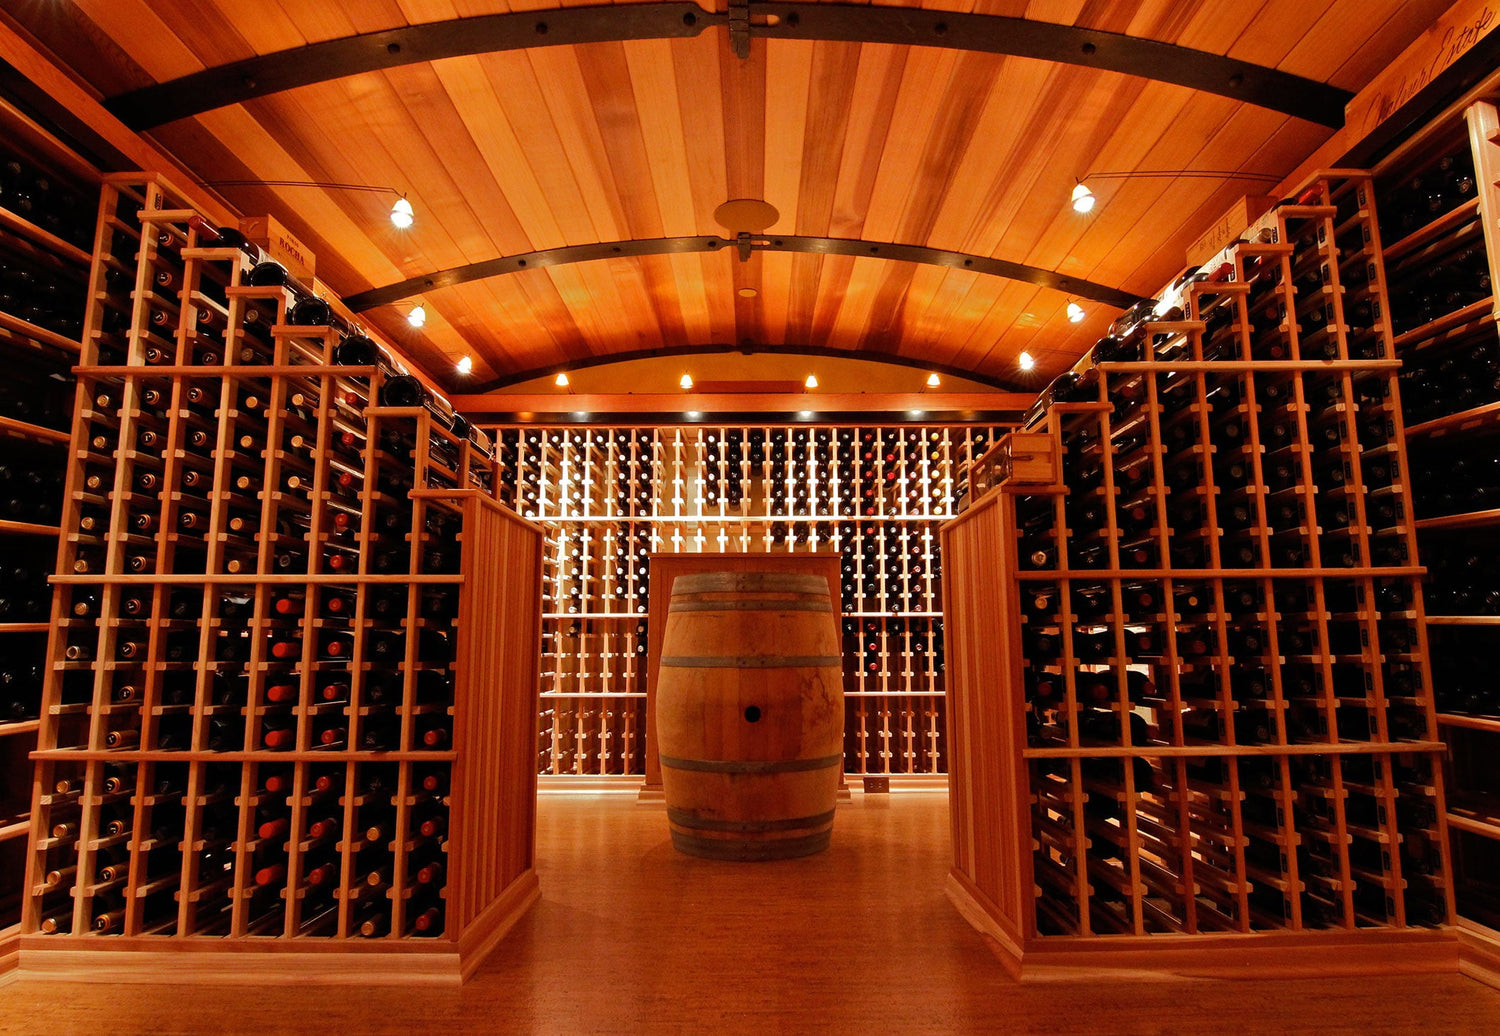 Steeped in tradition at Alana wines, storage is important.